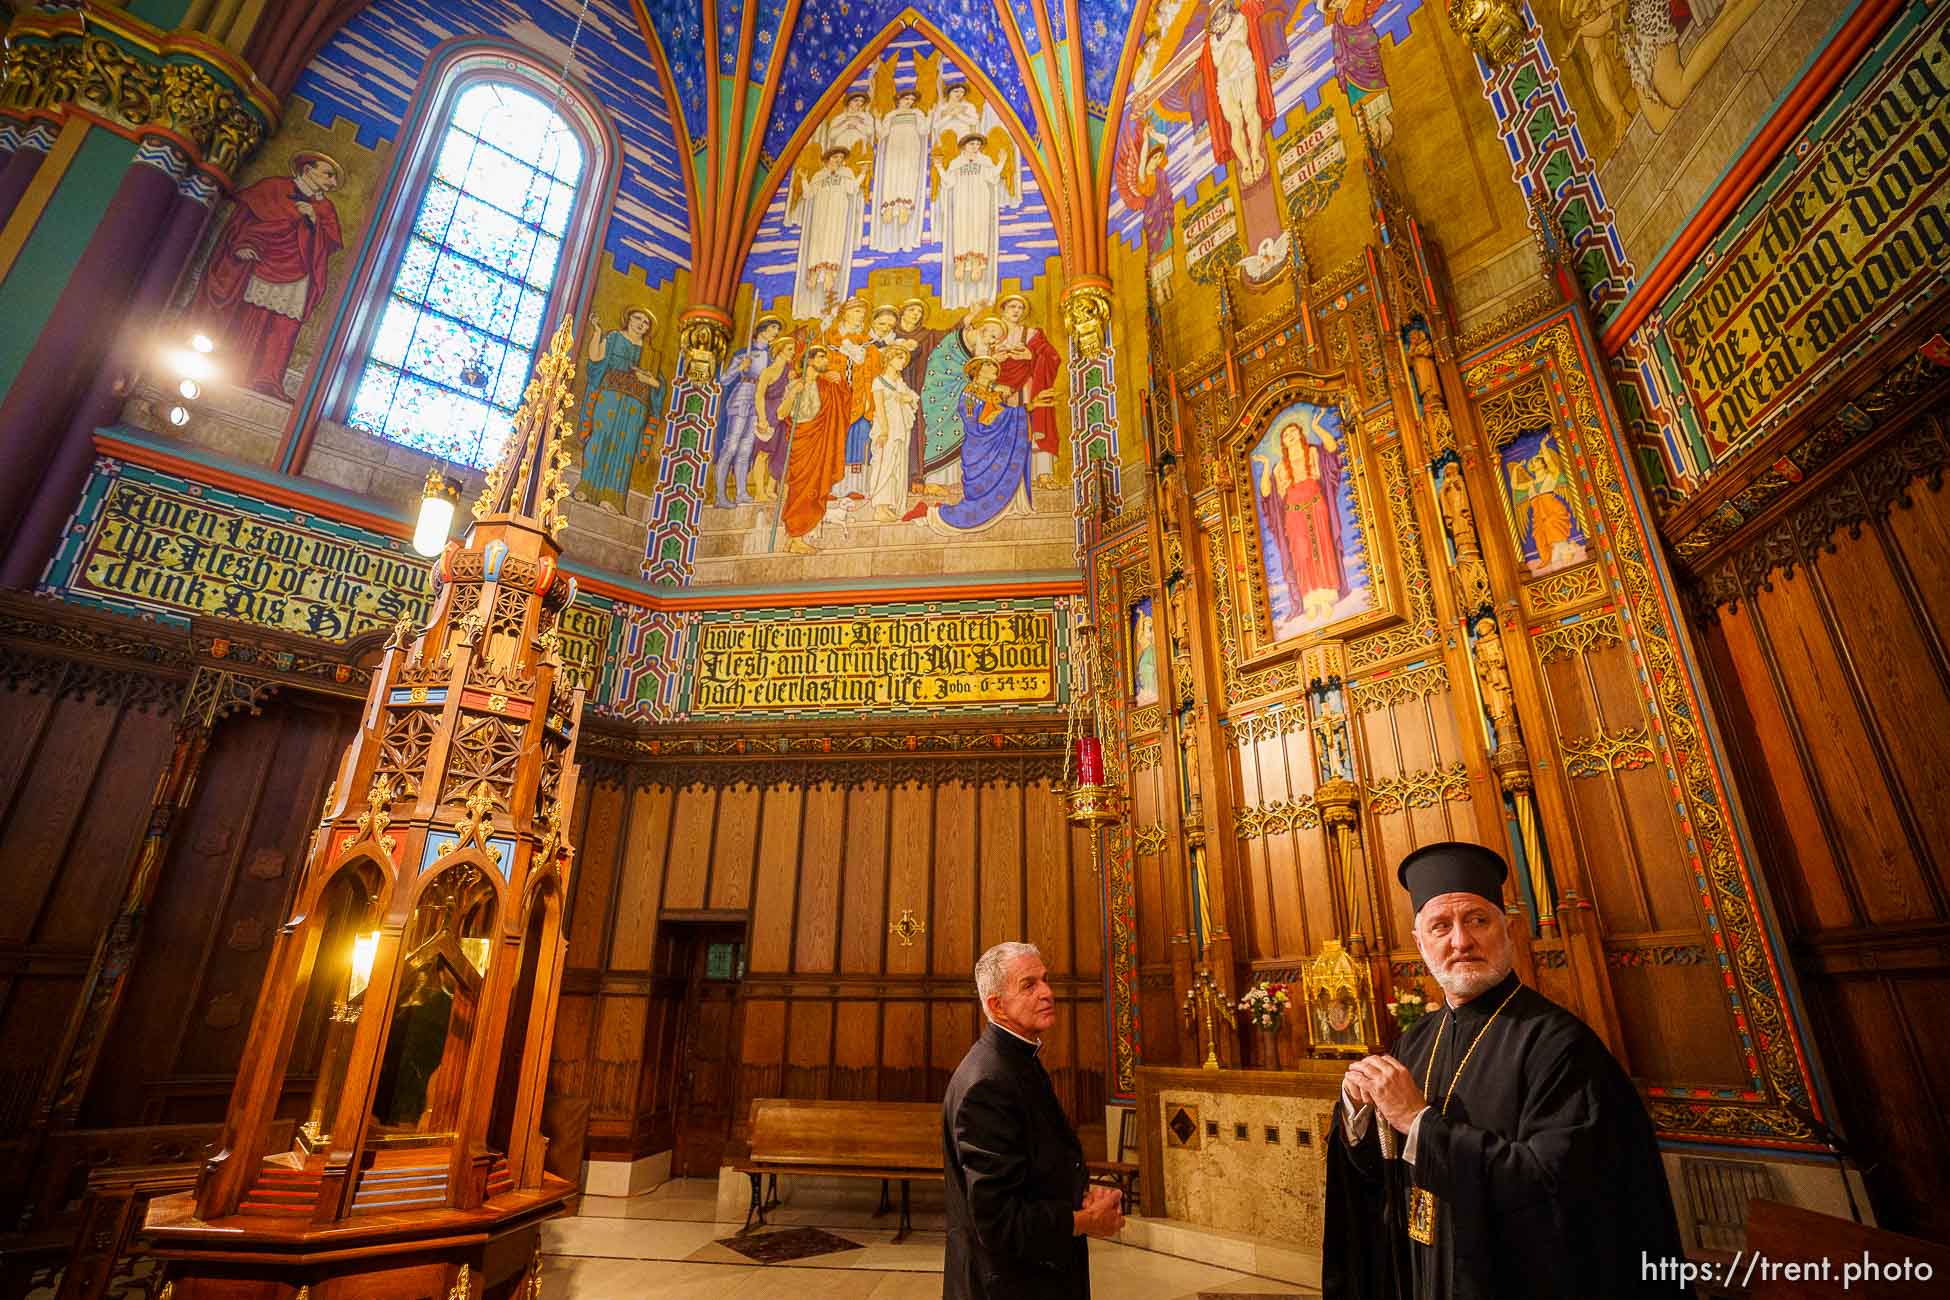 (Trent Nelson  |  The Salt Lake Tribune) His Eminence Archbishop Elpidophoros of America and Bishop Oscar A. Solis during a visit to the Cathedral of the Madeleine in Salt Lake City on Tuesday, July 20, 2021. Deacon Lynn Johnson leads the tour.